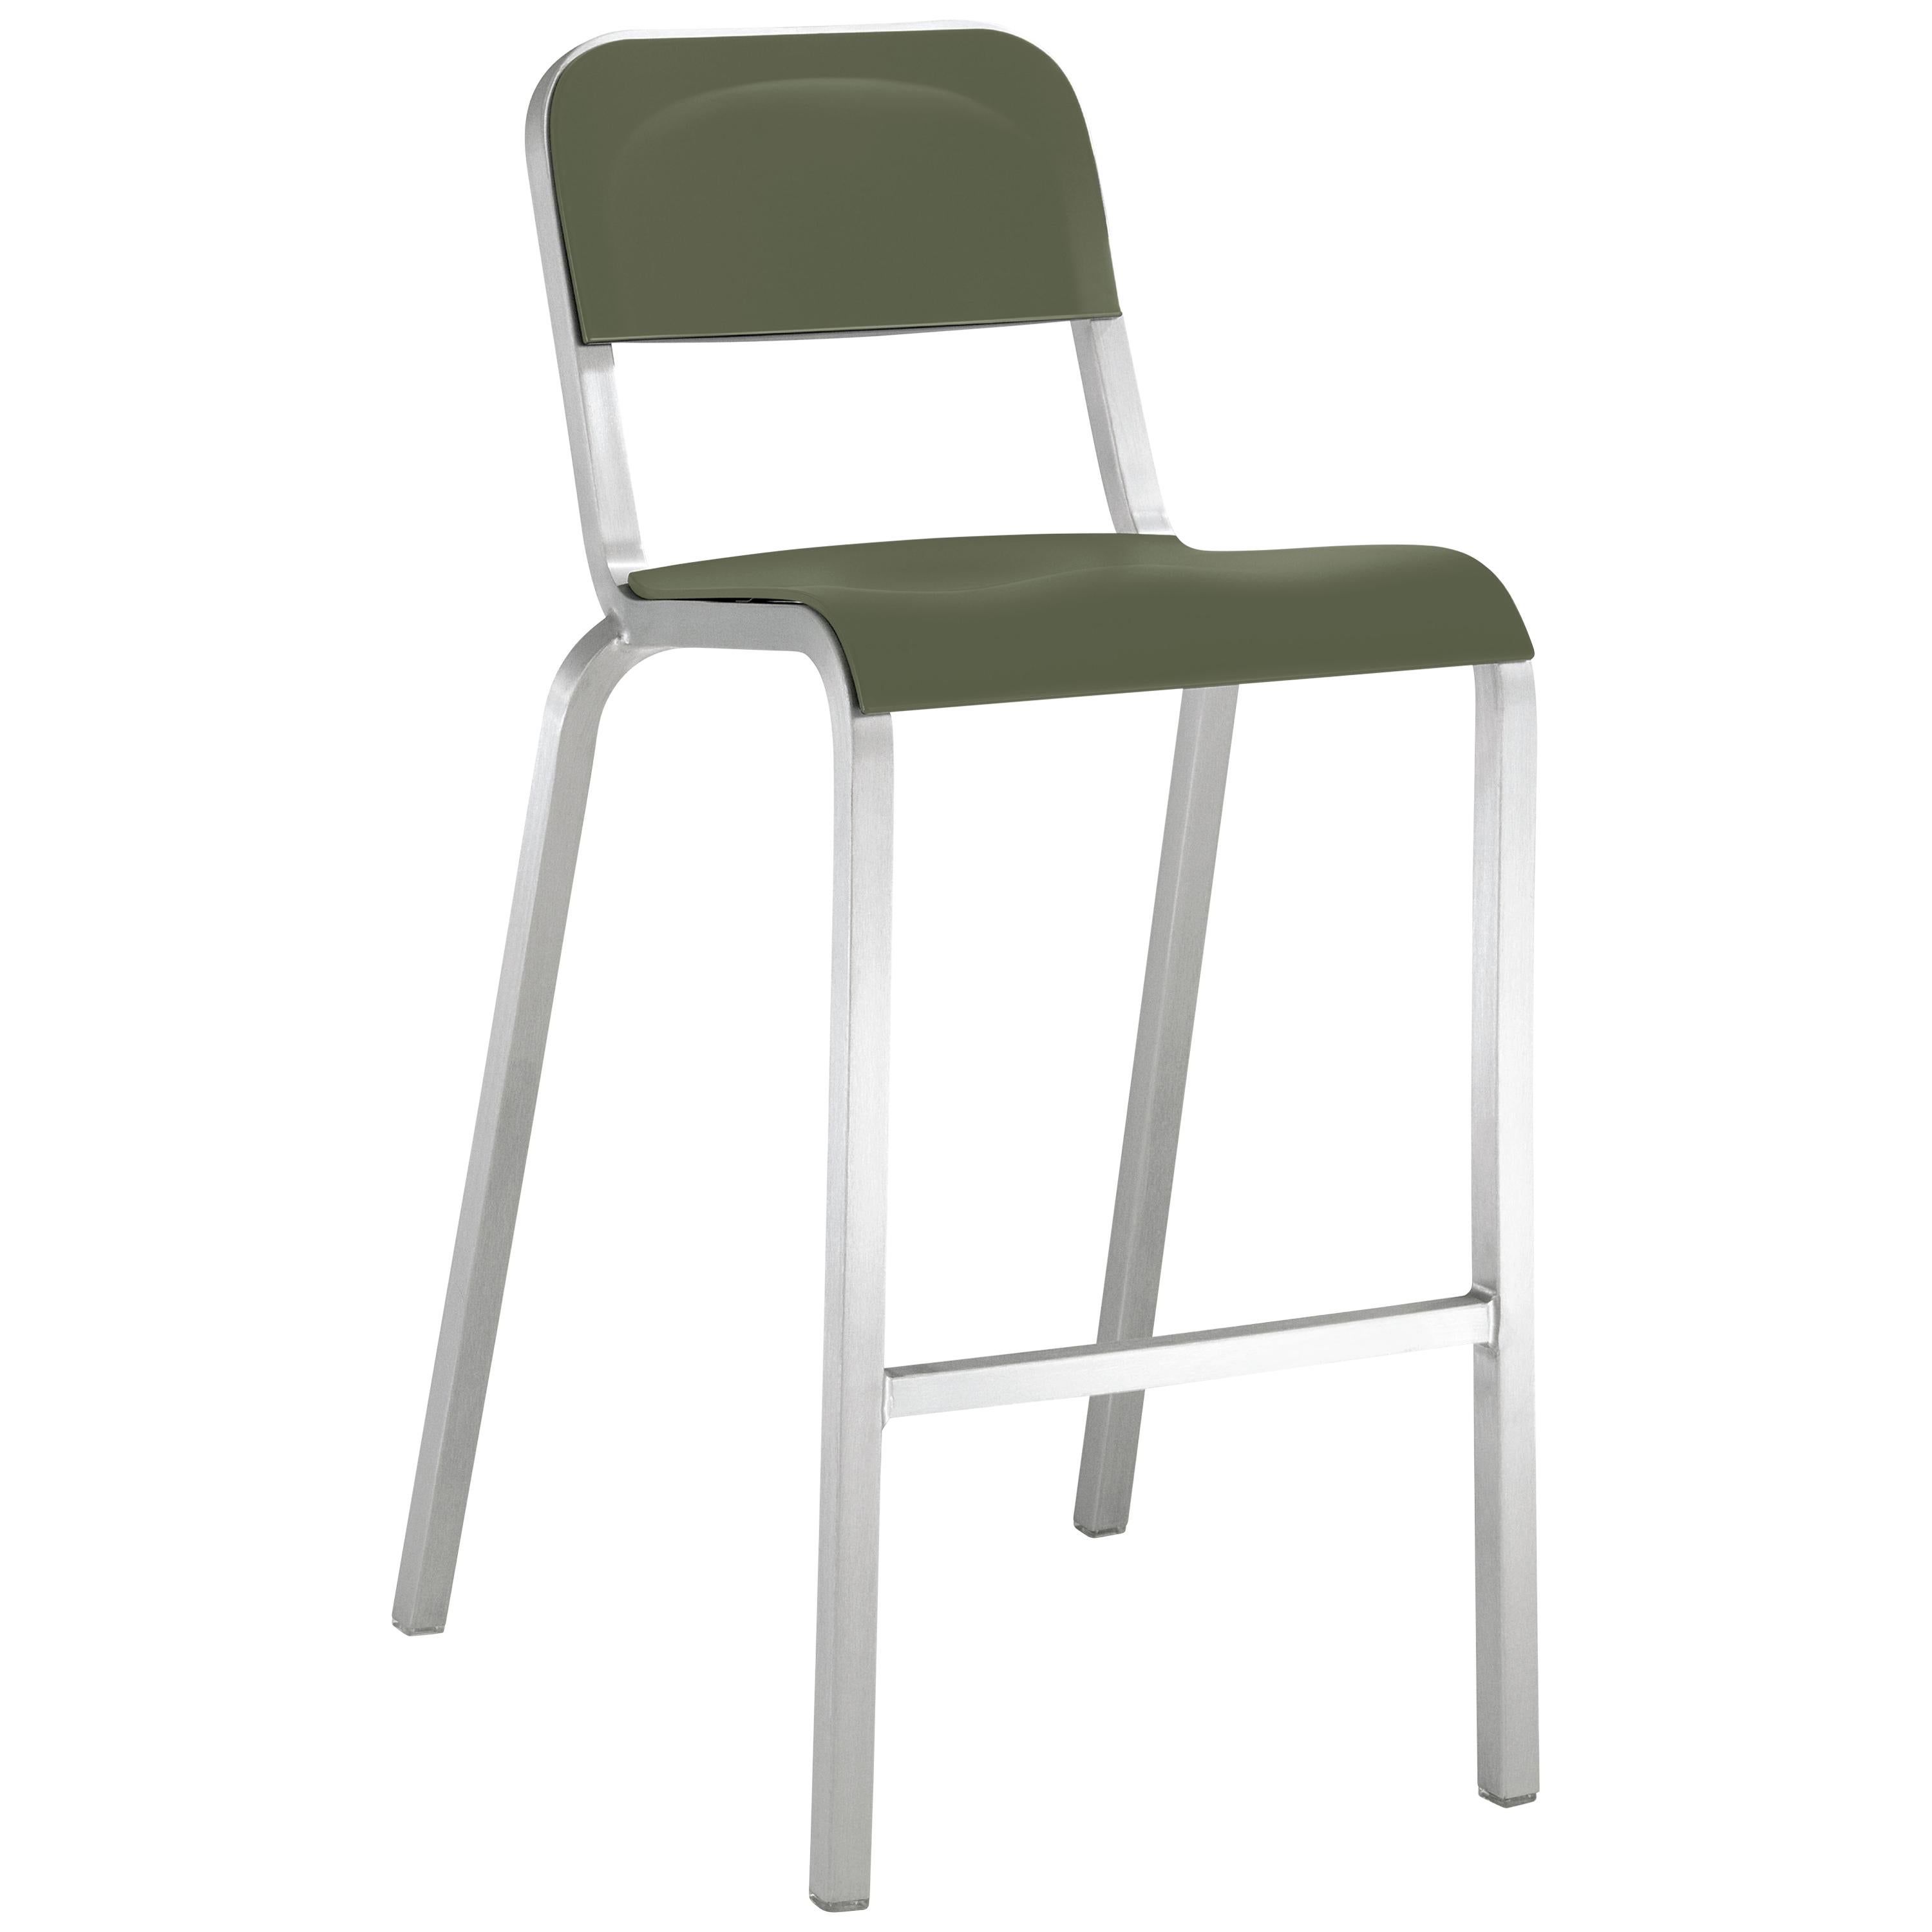 Emeco 1951 Aluminum Barstool with Cypress Green Seat by Adrian Van Hooydonk For Sale